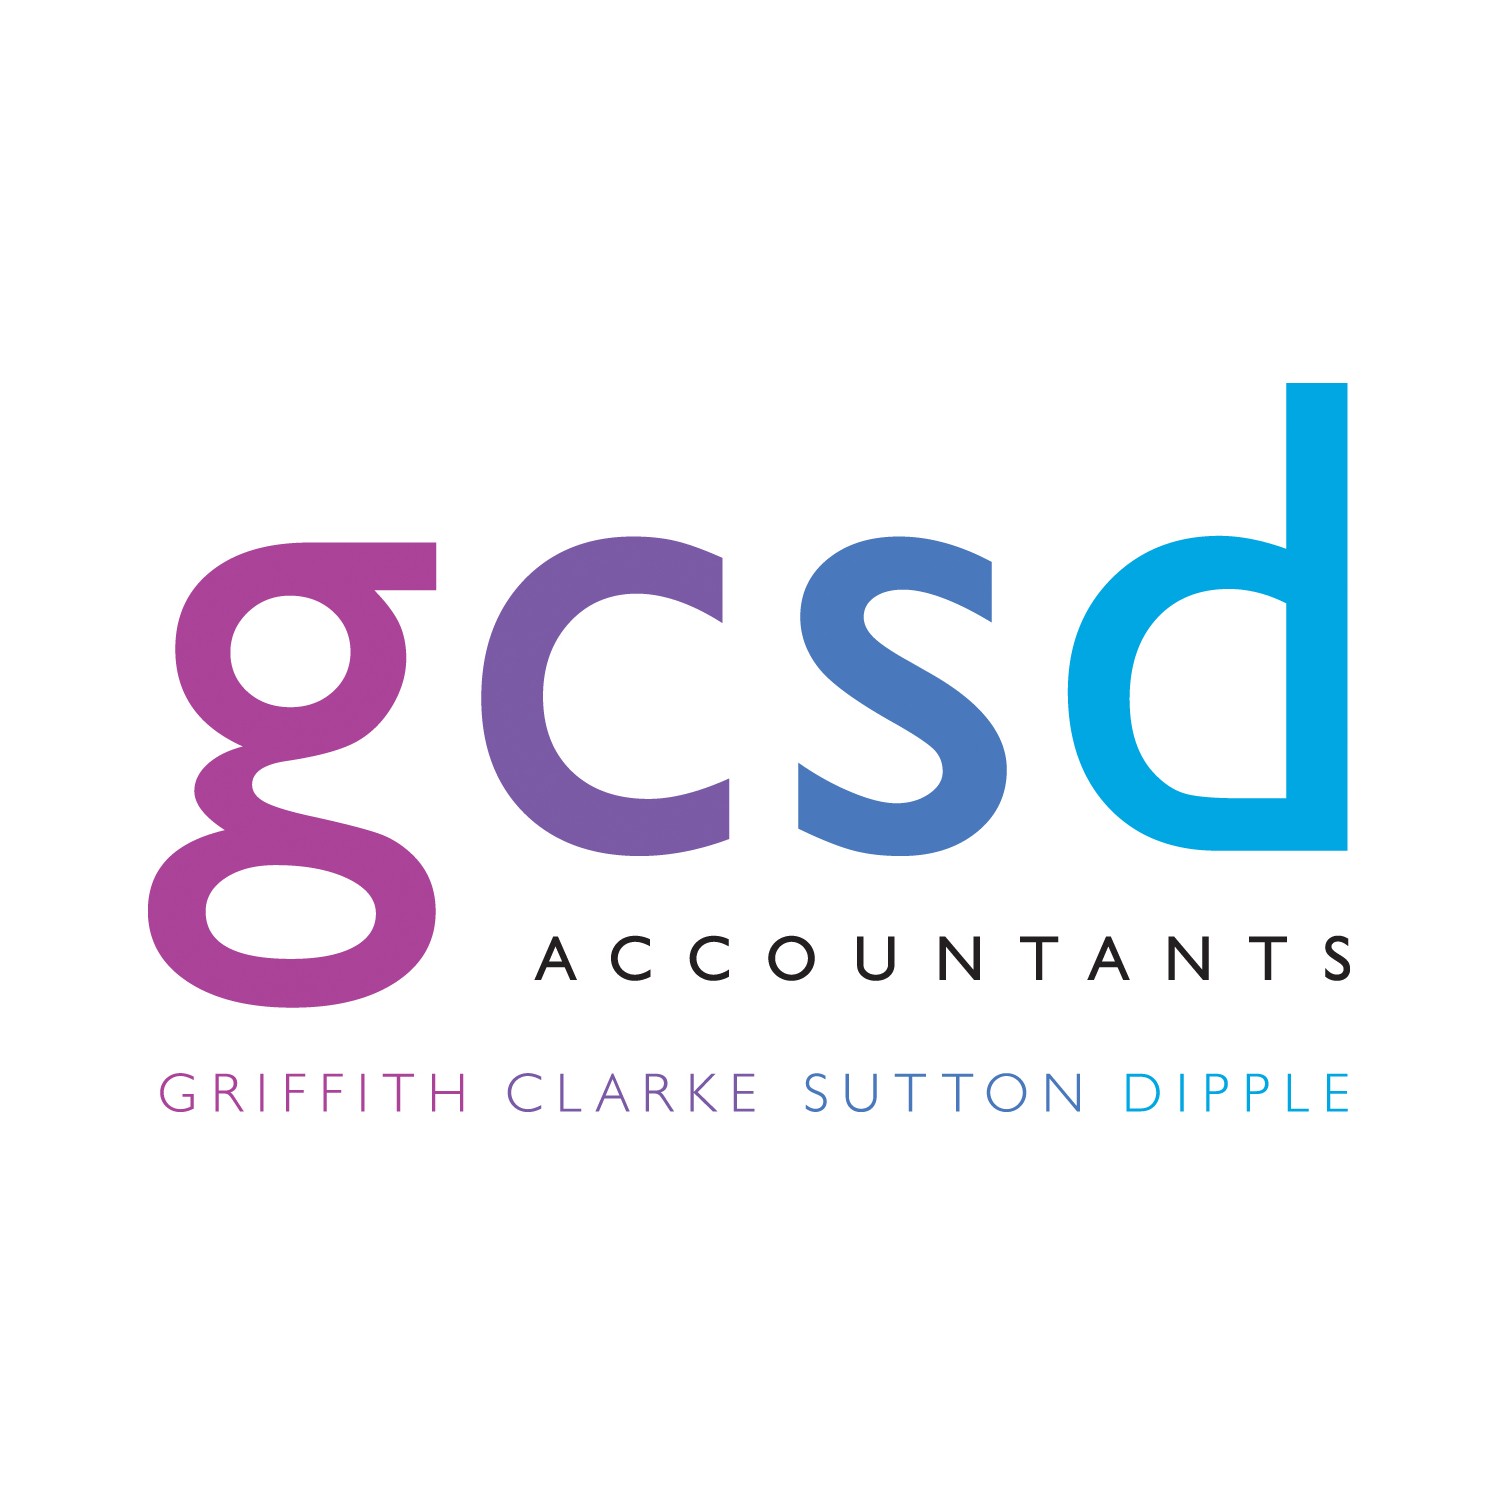 Logo of GCSD Accountants Ltd Chartered Accountants In Stroud, Gloucestershire